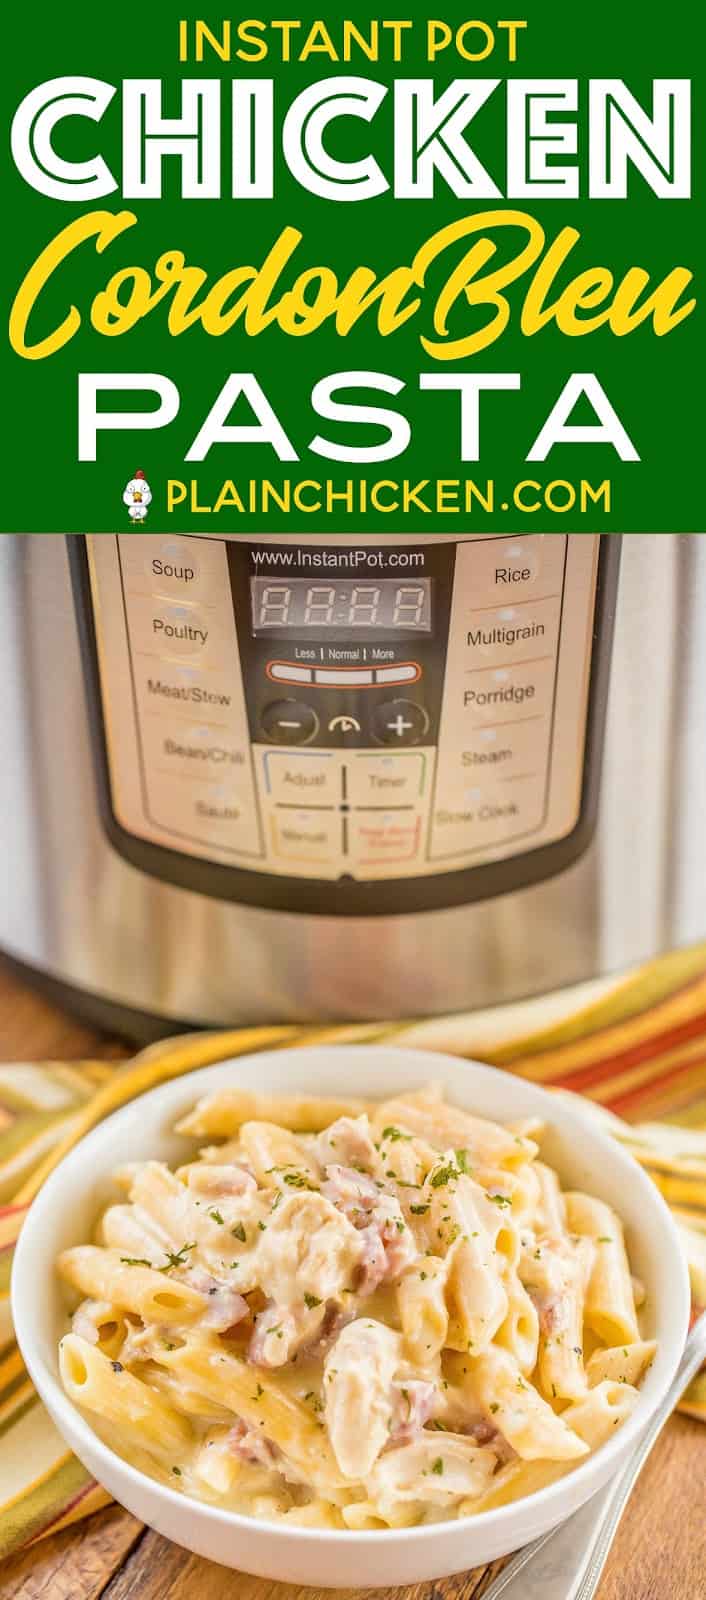 Instant Pot Chicken Cordon Bleu Pasta - only 4 minutes of cook time! Chicken, ham, dijon mustard, garlic, cream cheese, penne pasta, chicken broth, water, swiss cheese and parmesan. Crazy delicious! We made this twice in one week. #instantpot #chicken #pasta #ham #cheese